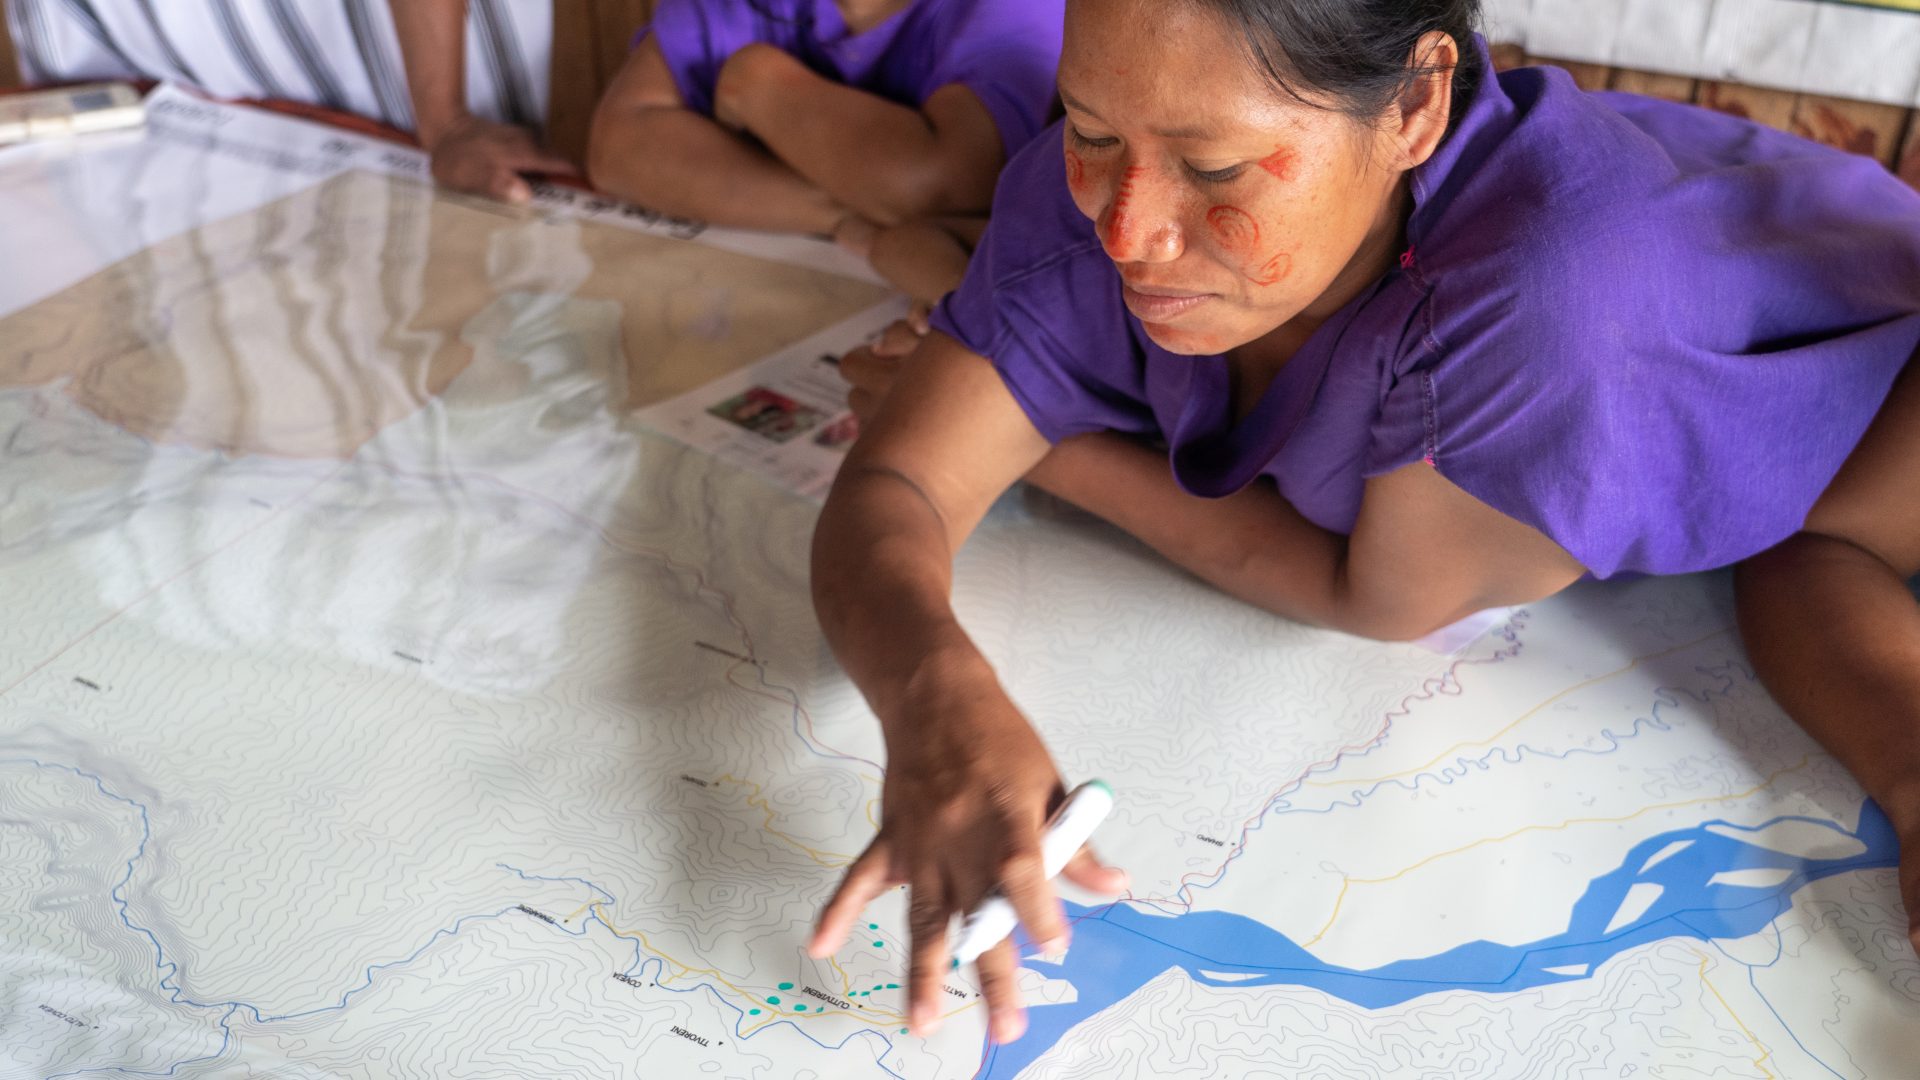 A group of people drawing details on a large printed out map of their home area.